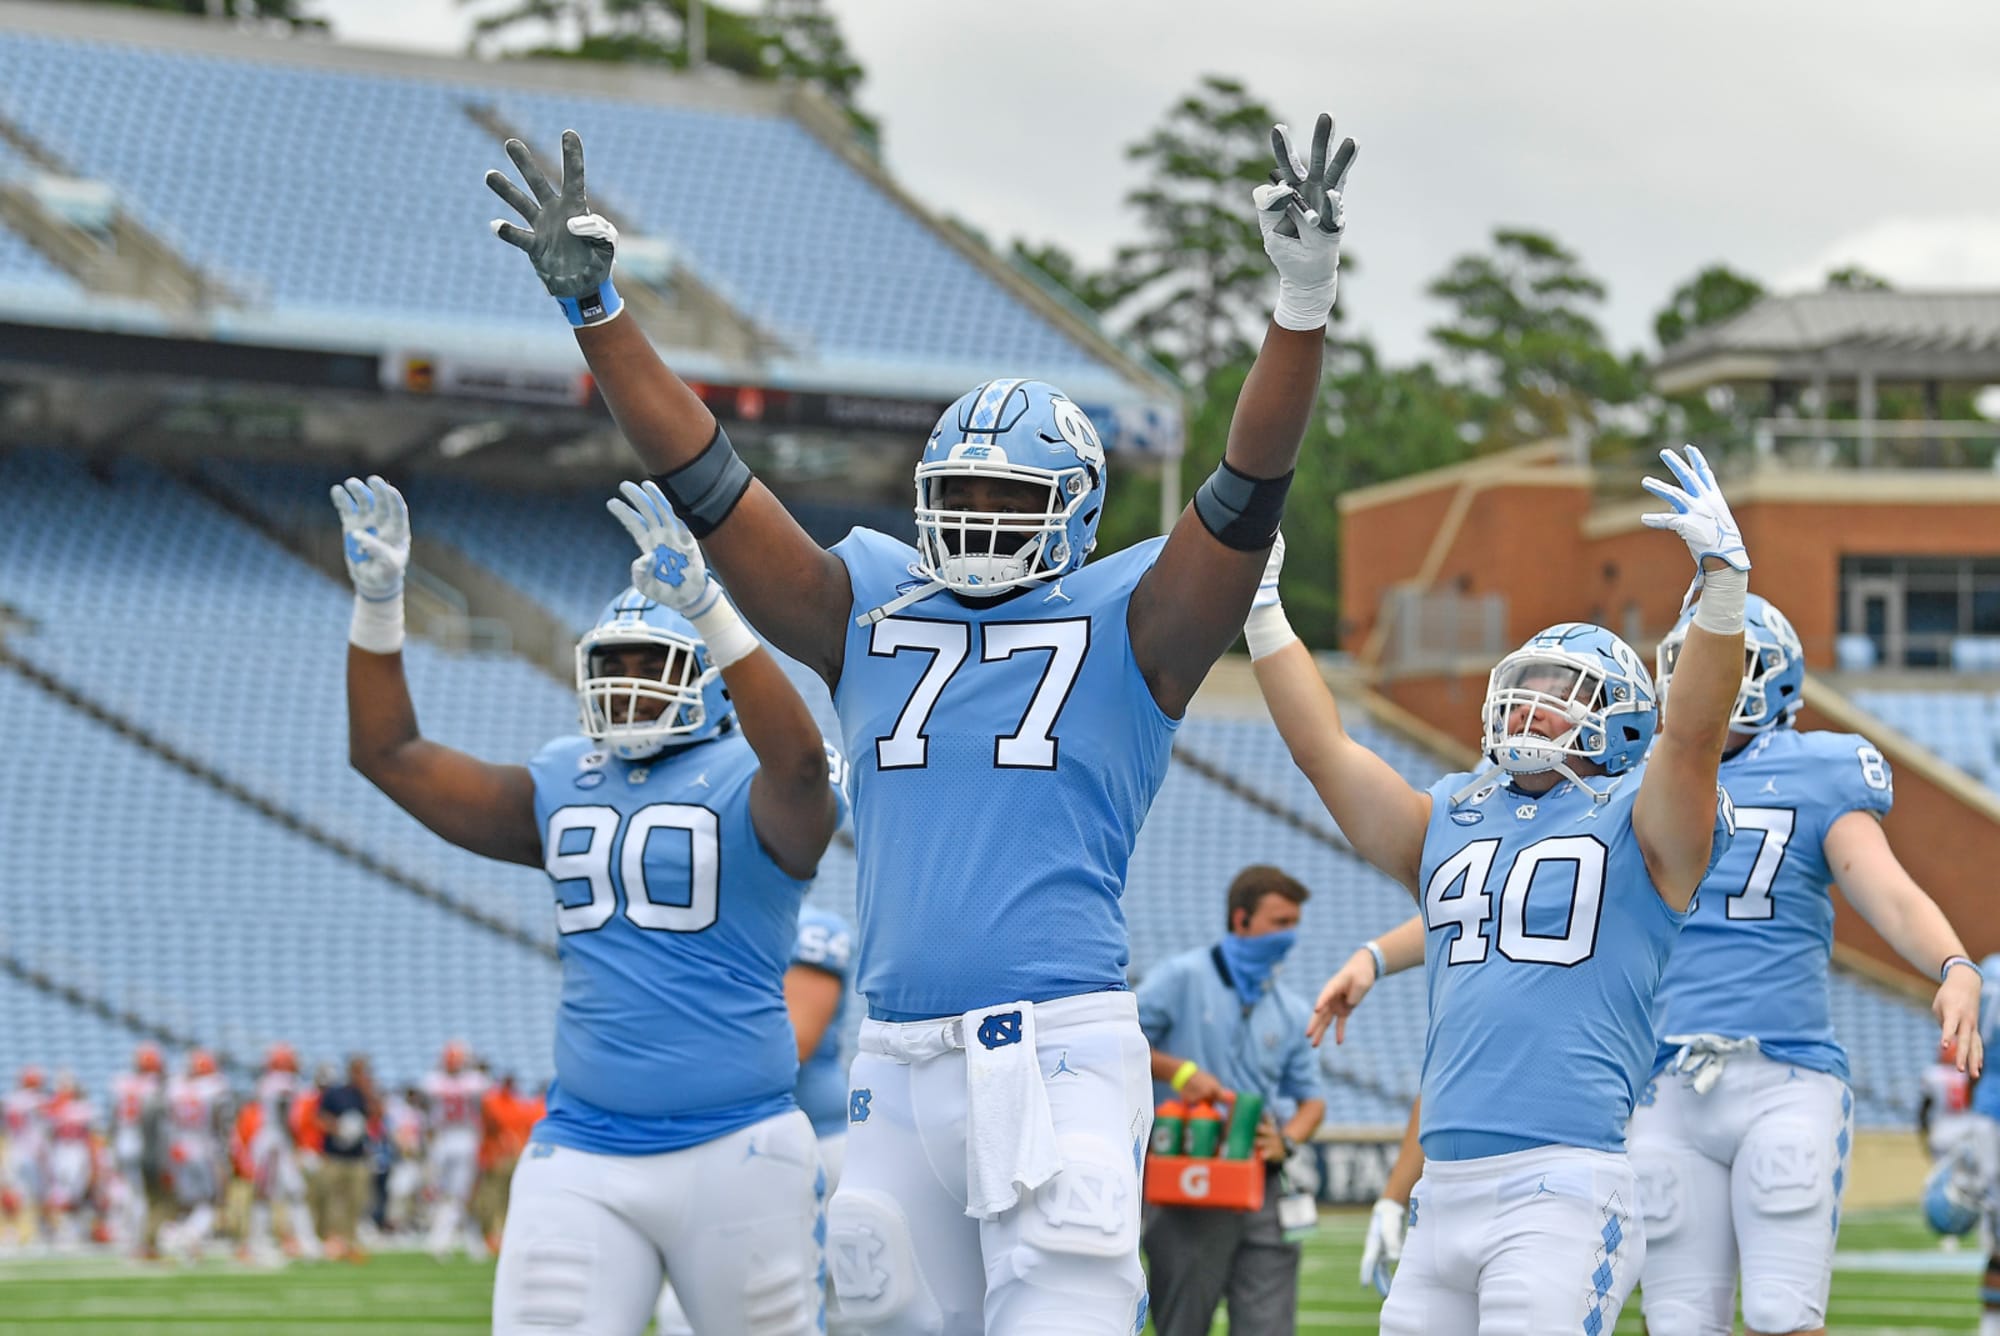 UNC Football: North Carolina outlasts Syracuse in opening day game